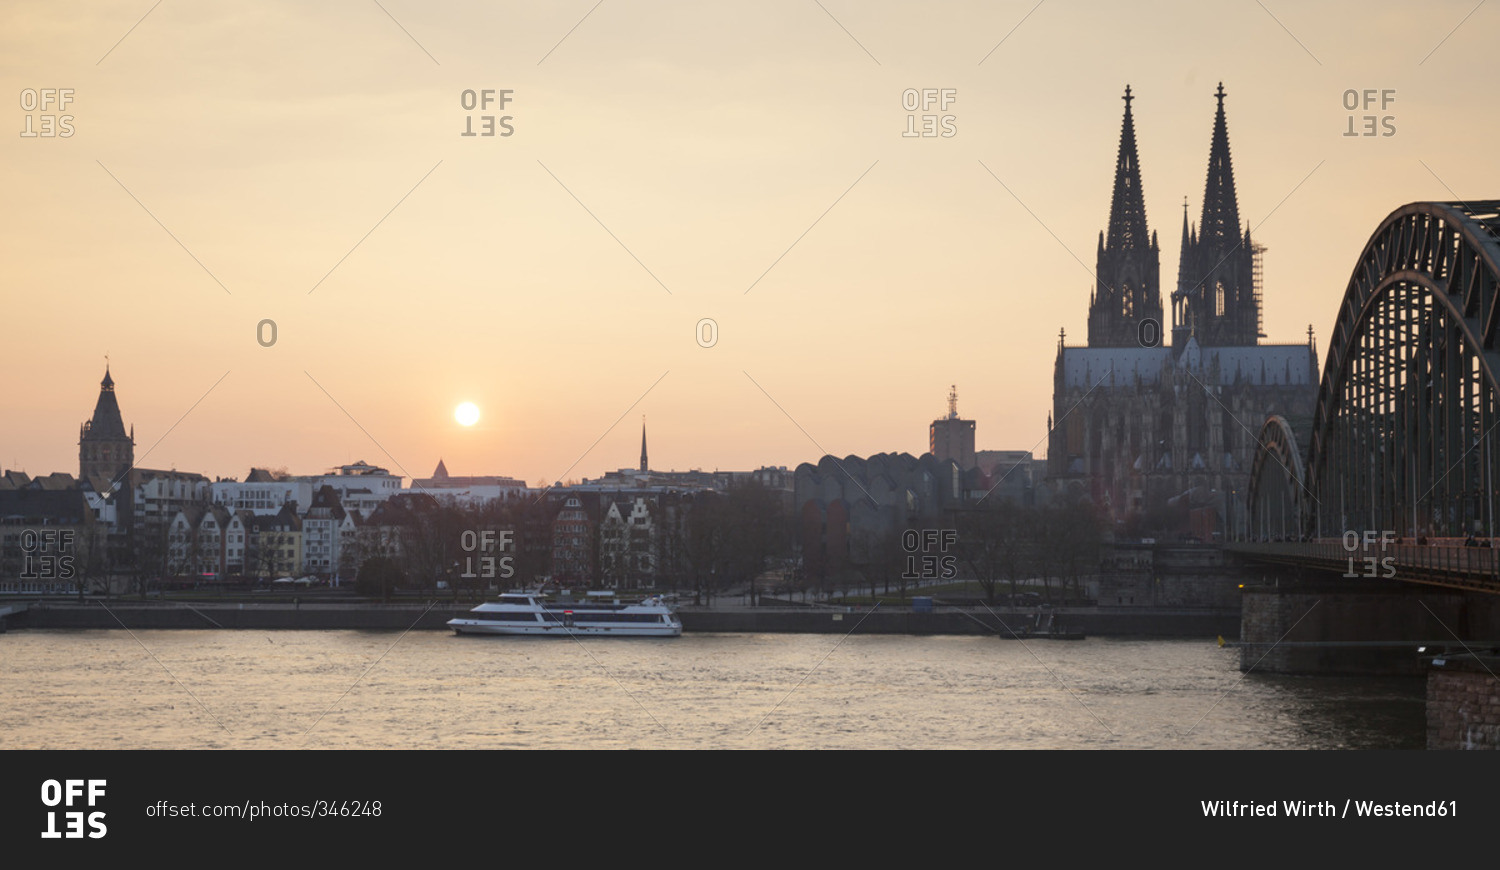 Germany, Cologne, view to the old town and Cologne Cathedral by sunset